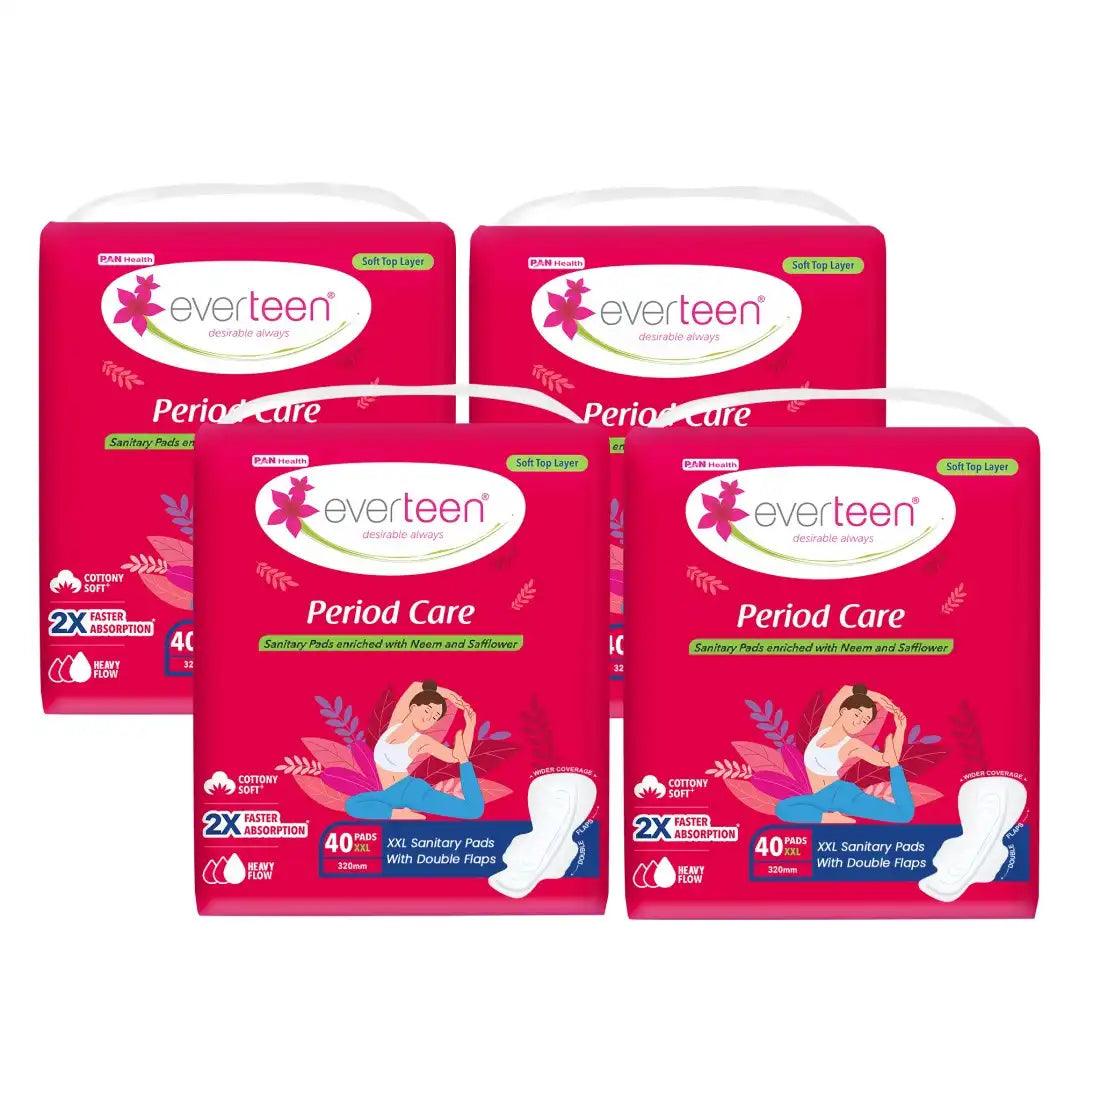 Buy 4 Packs everteen Period Care XXL Soft 40 Sanitary Pads with Double Flaps, Neem and Safflower - Official Brand Store